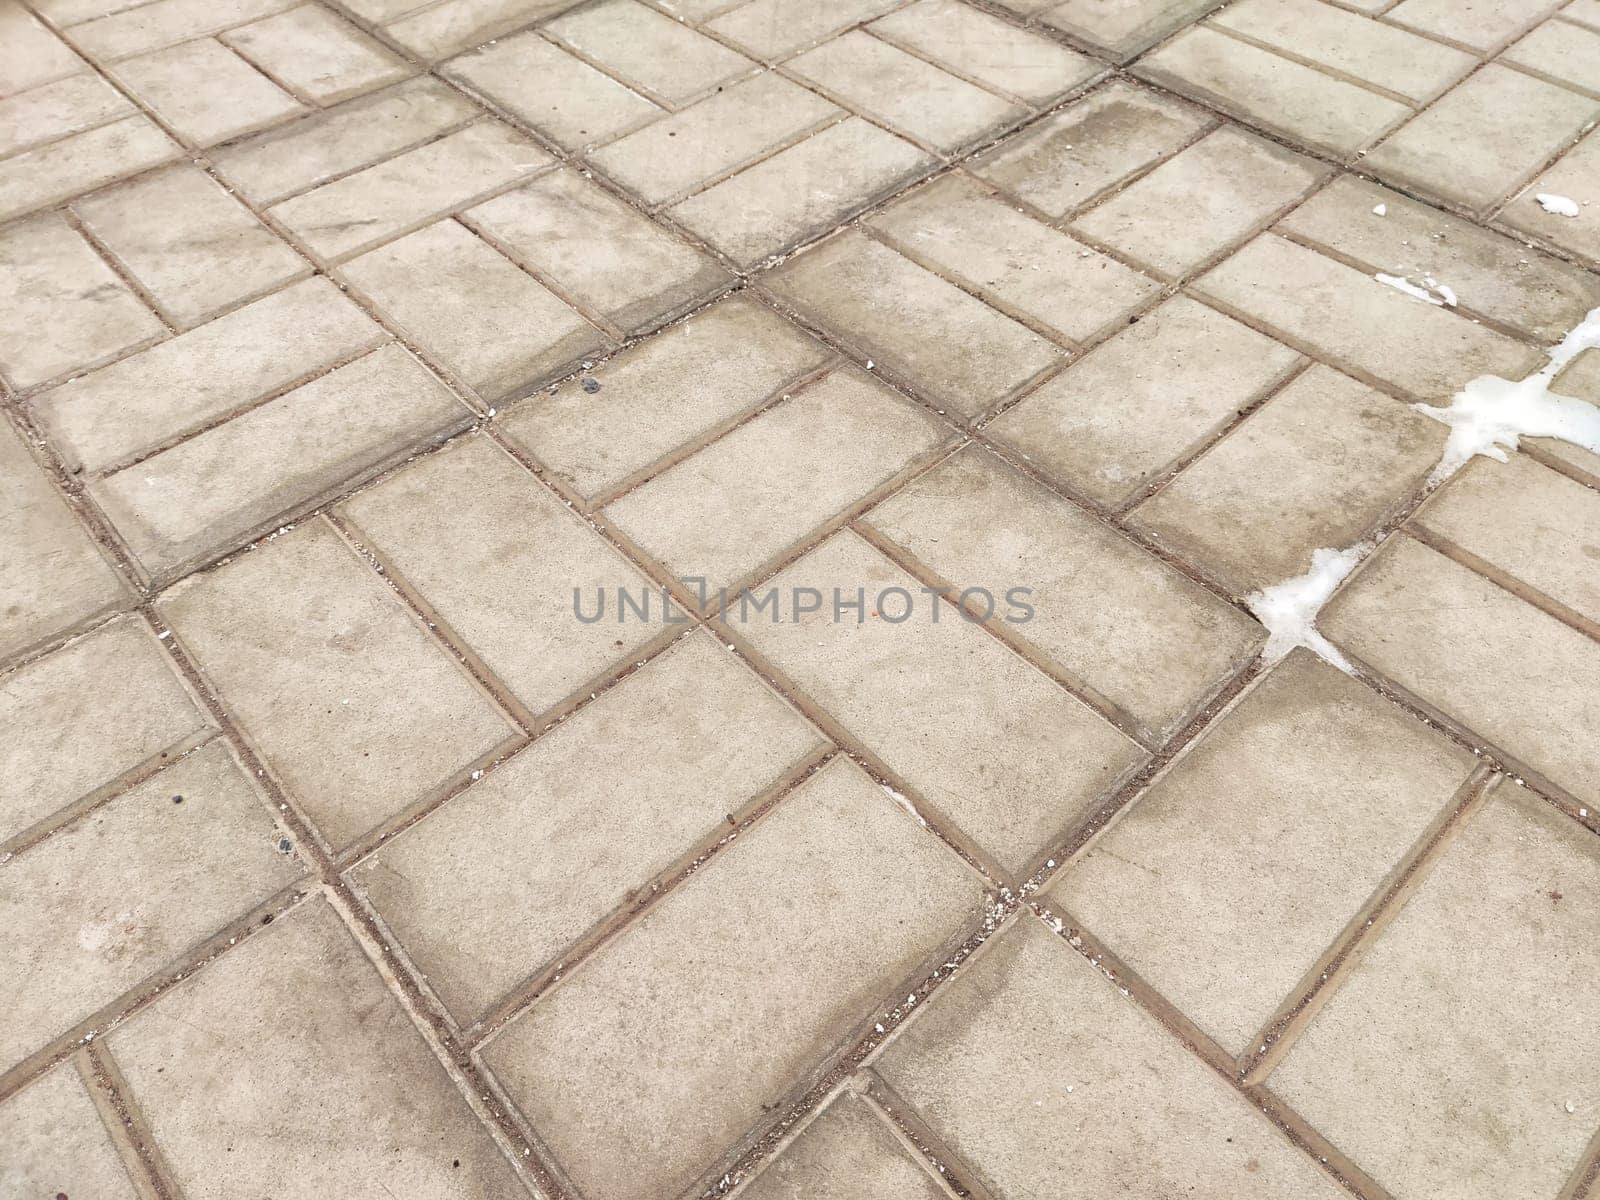 Worn tiles and snow on the ground. Background, texture, pattern, copy space